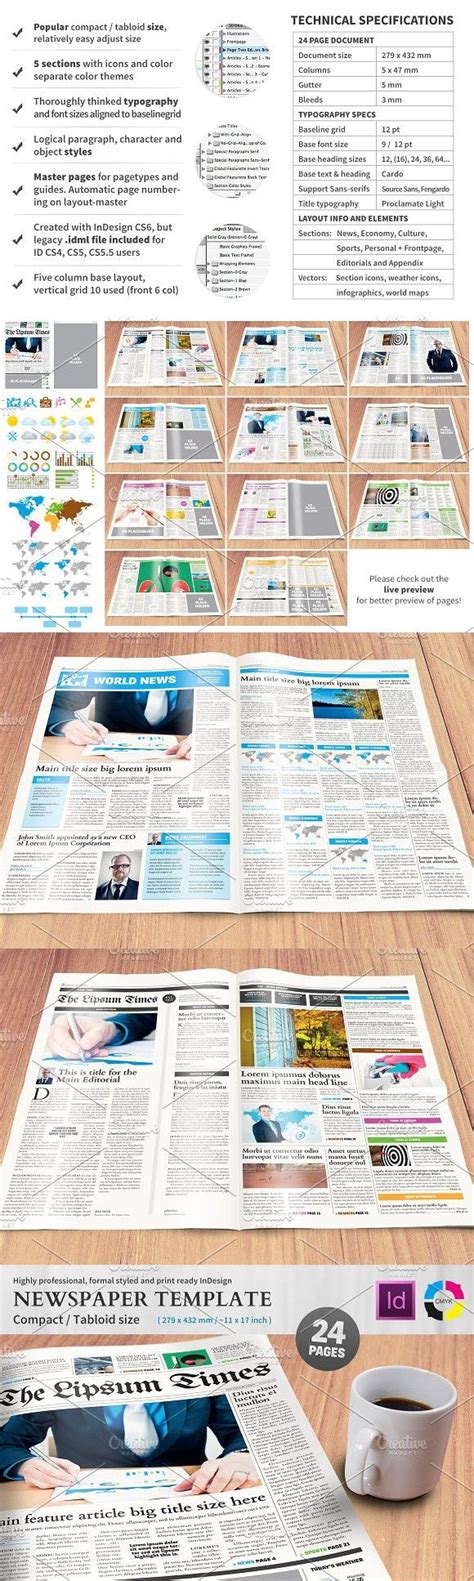 The title service is written in our golden shine lettering as the magazine name with all text fields editable so you can truly personalize it especially for your loved one. Newspaper Template - compact/tabloid | Newspaper template, Templates, Indesign templates